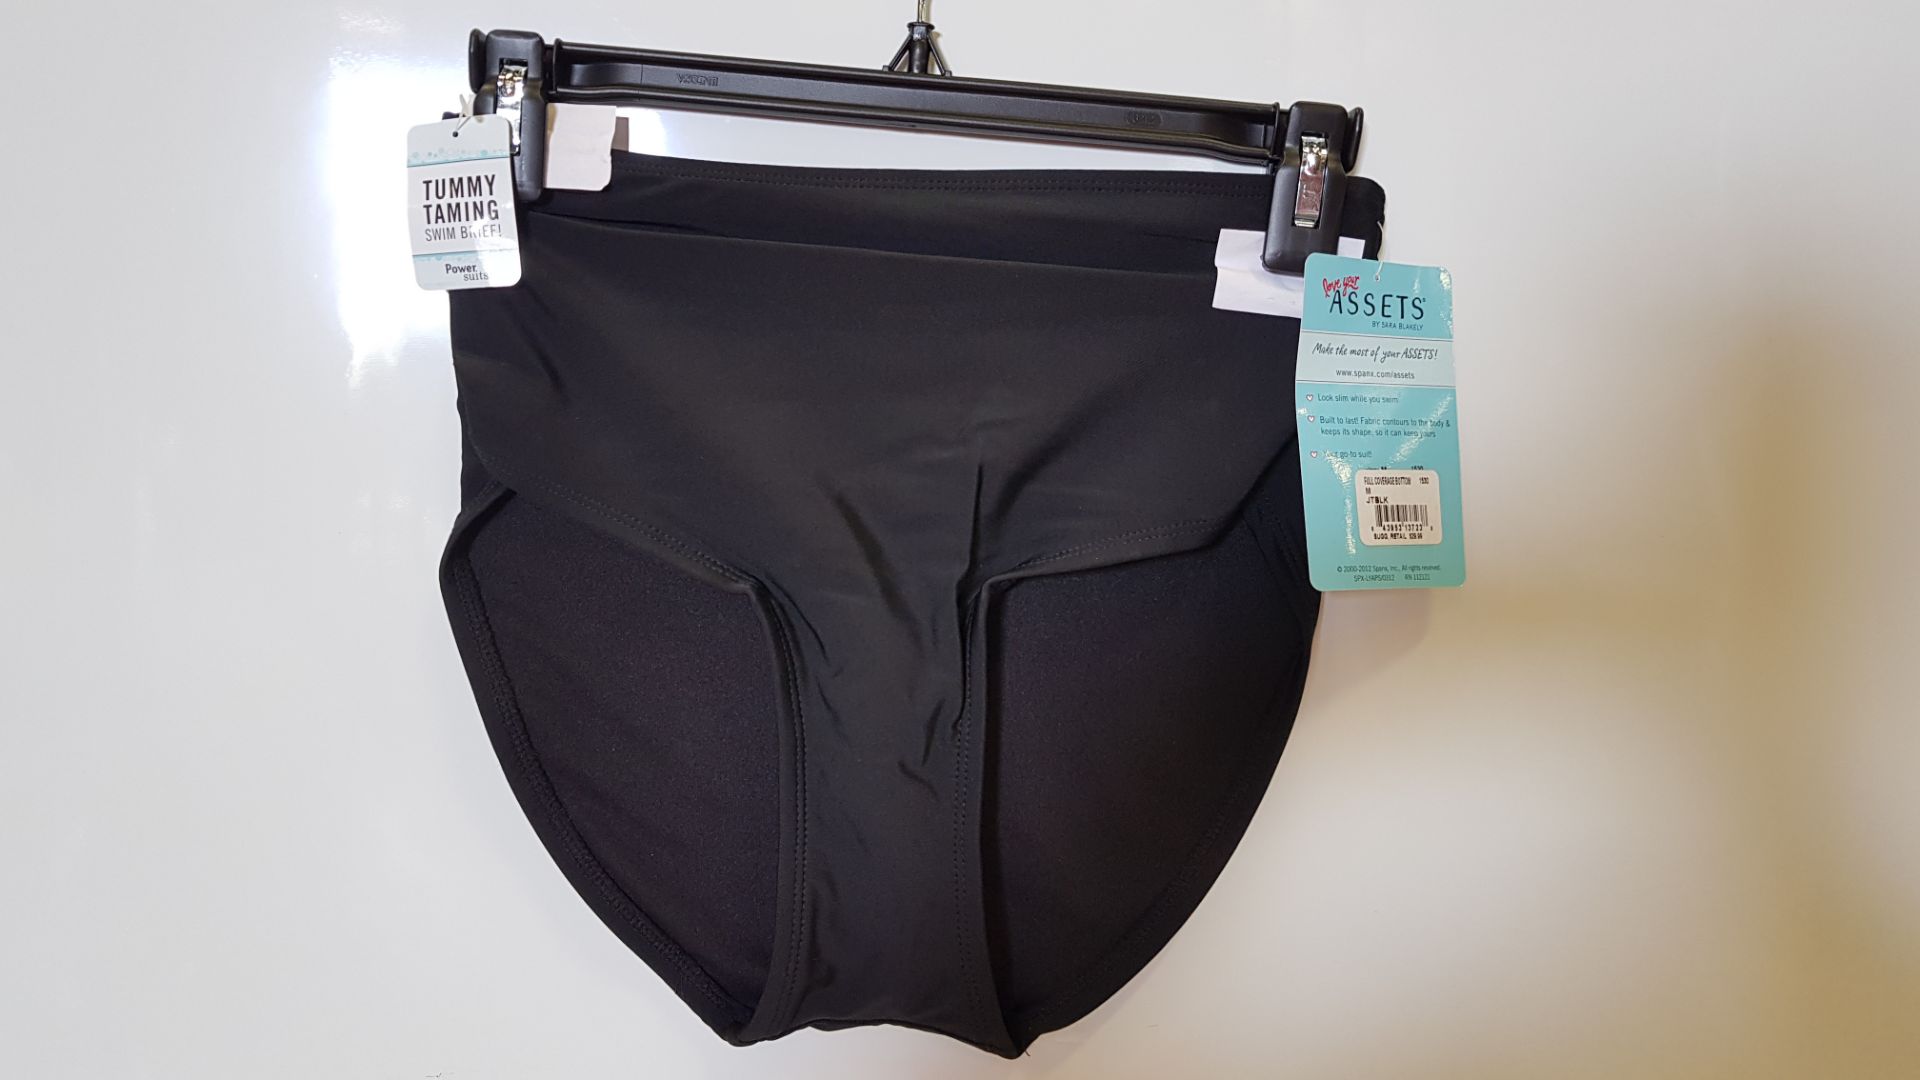 19 X BRAND NEW SPANX FULL COVERAGE BOTTOMS IN JET BLACK SIZE LARGE RRP $29.99 (TOTAL RRP £569.81)